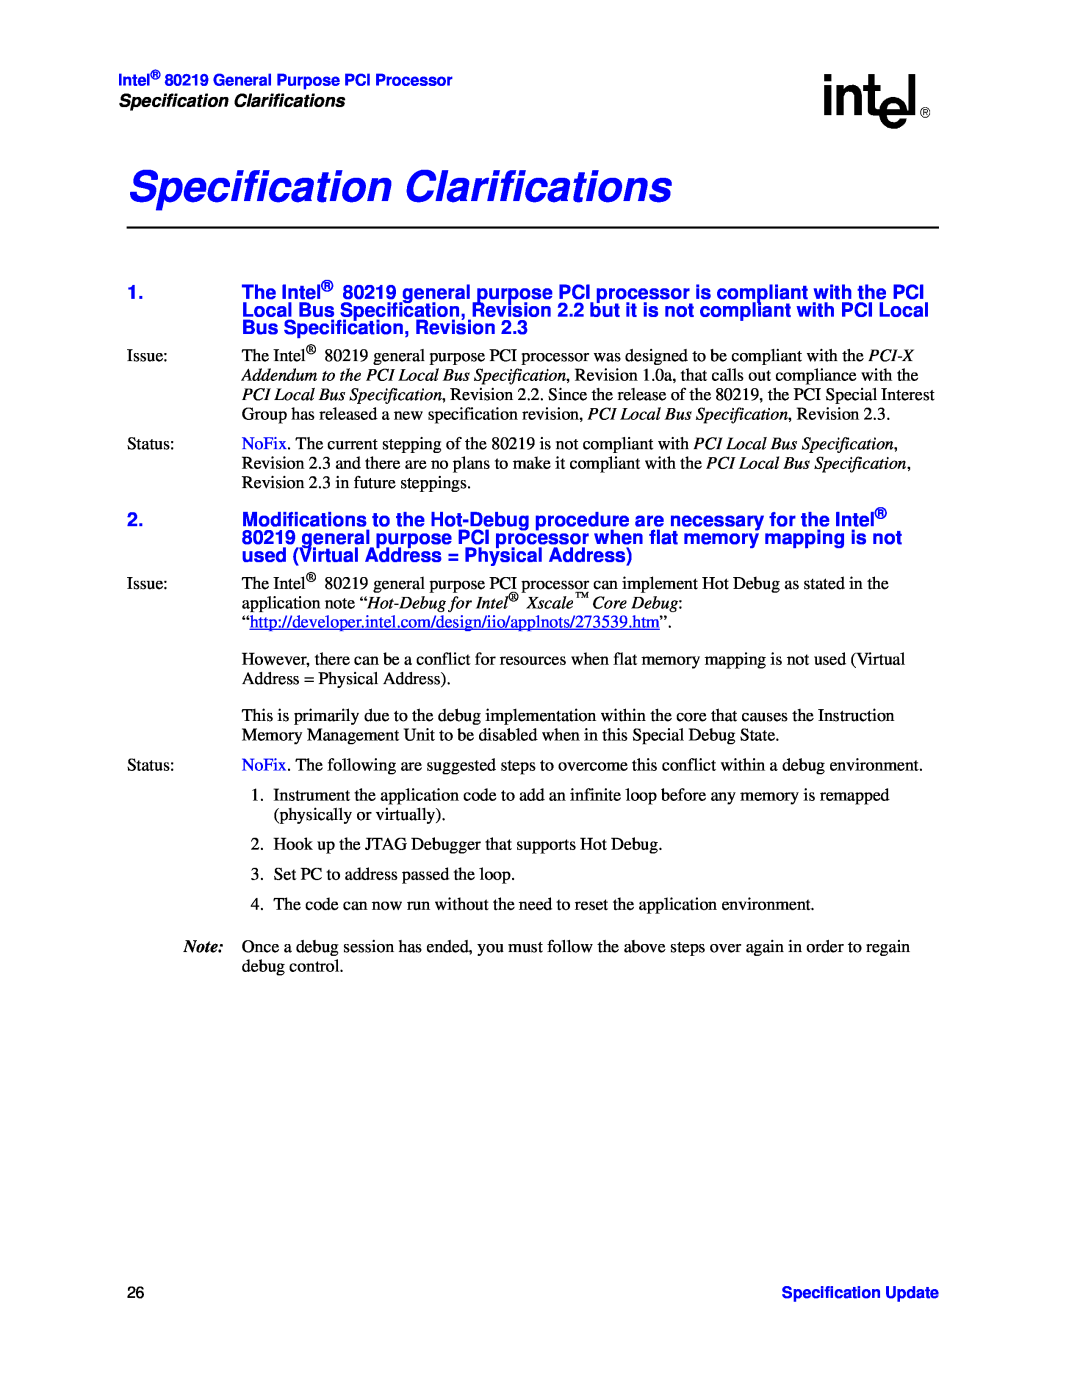 Intel 80219 specifications Specification Clarifications 